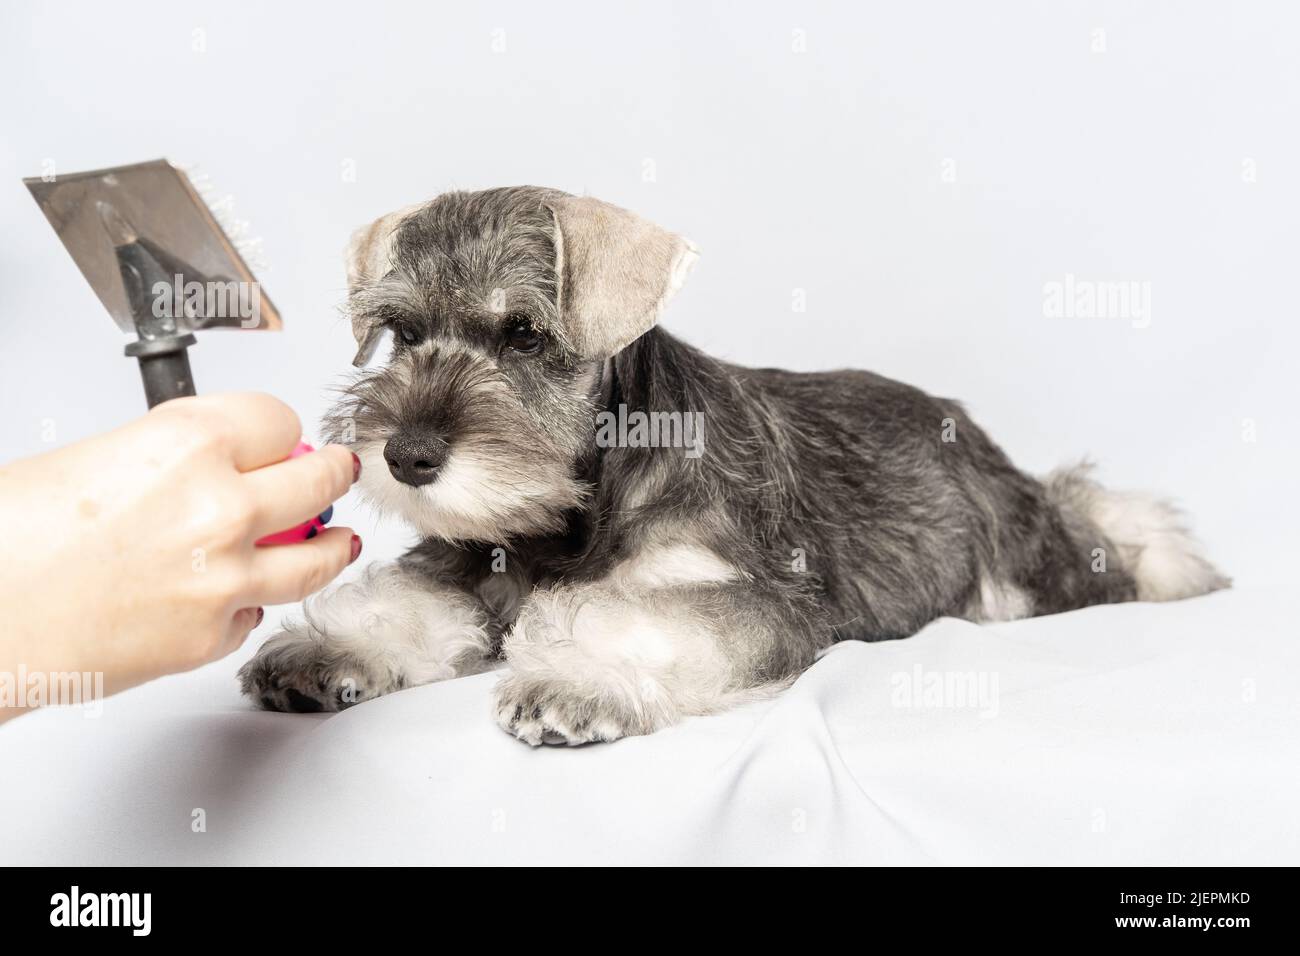 Home dog grooming. A hand holding a comb for caring for the animal's fur. A miniature Schnauzer dog lying on a table waiting for a haircut, combing. Stock Photo